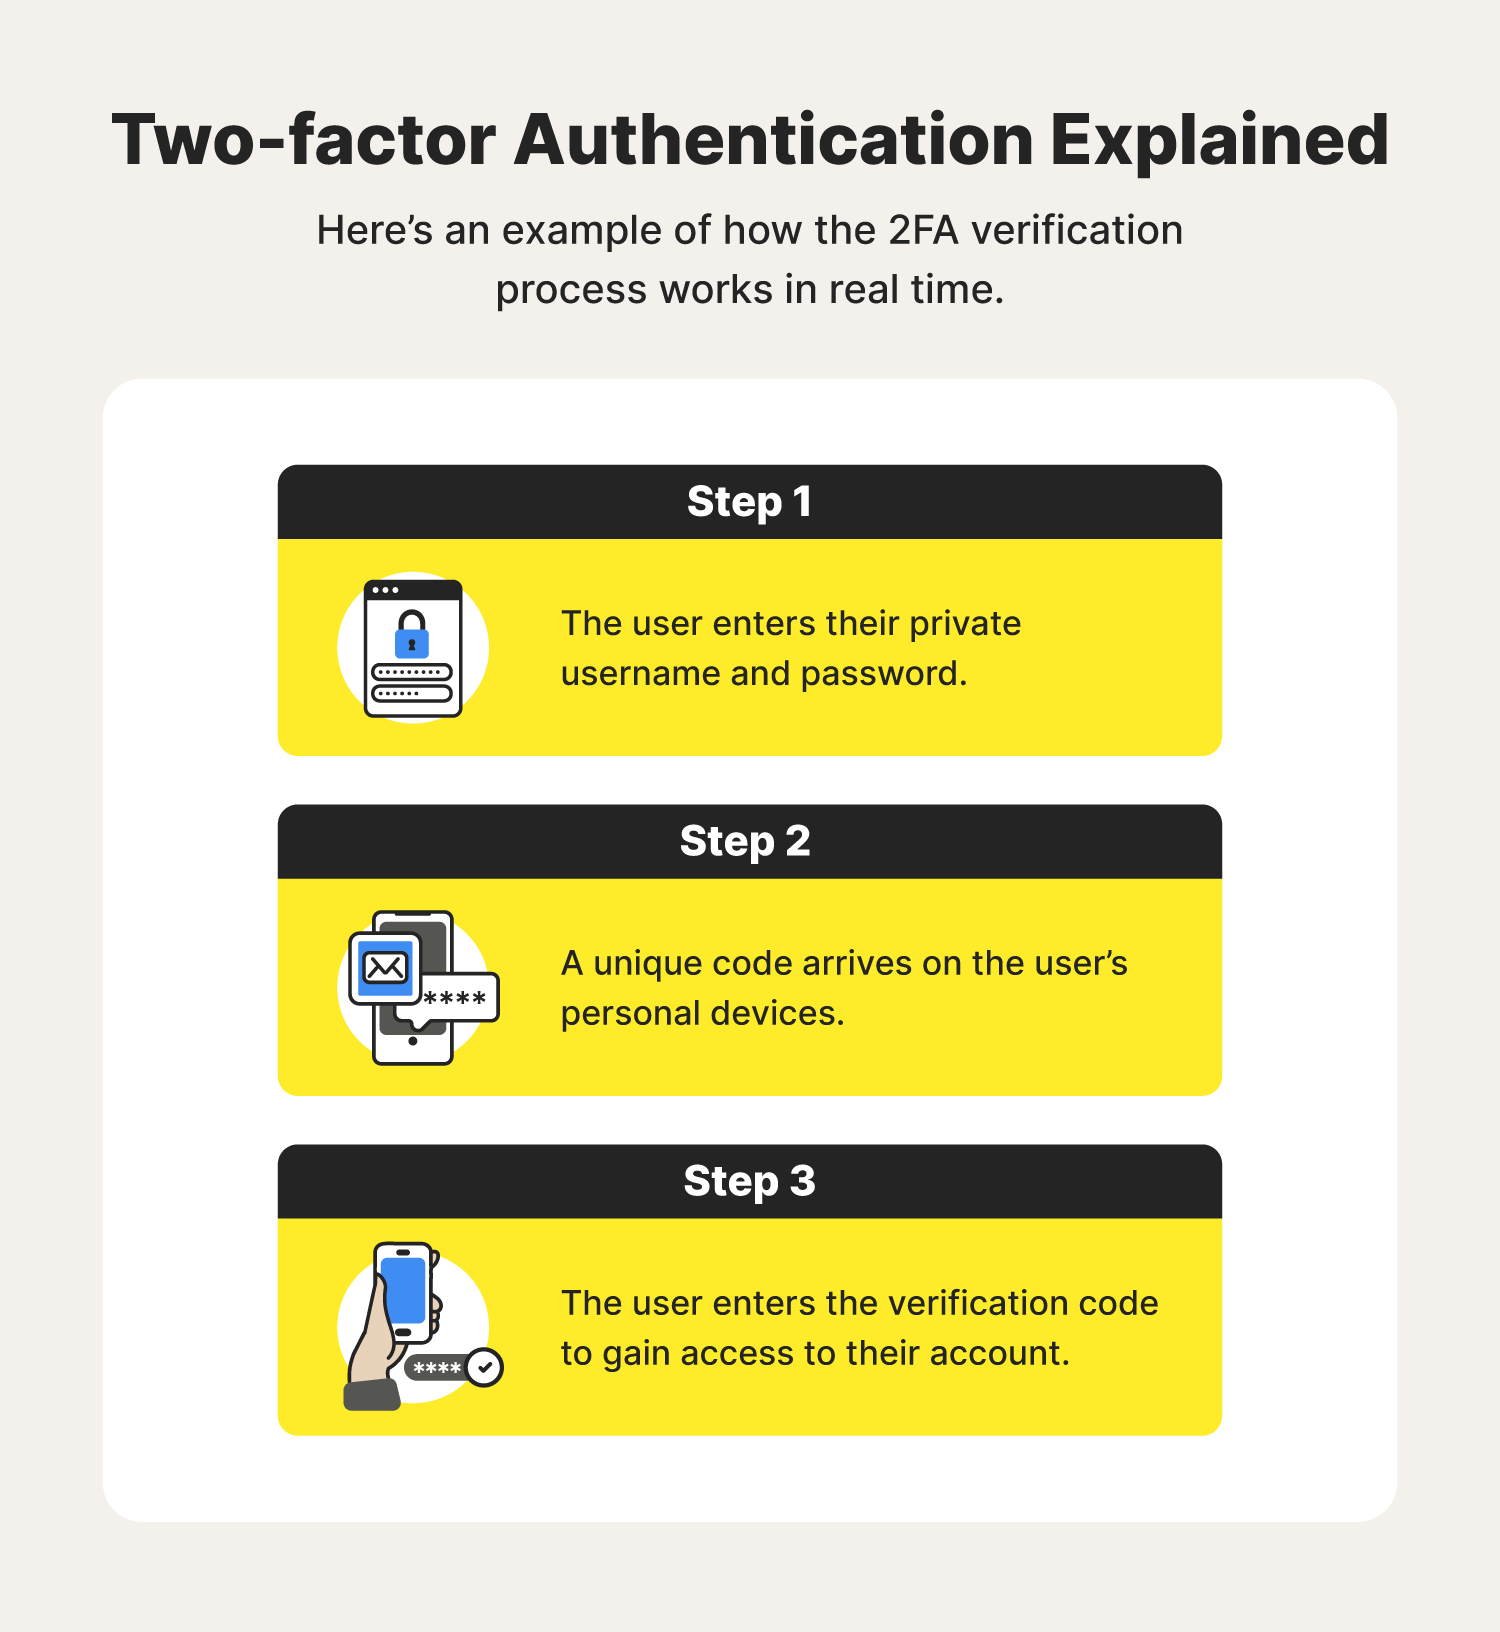 Three illustrations accompany the steps of the 2FA verification process to help people find an answer to “What is 2FA?”